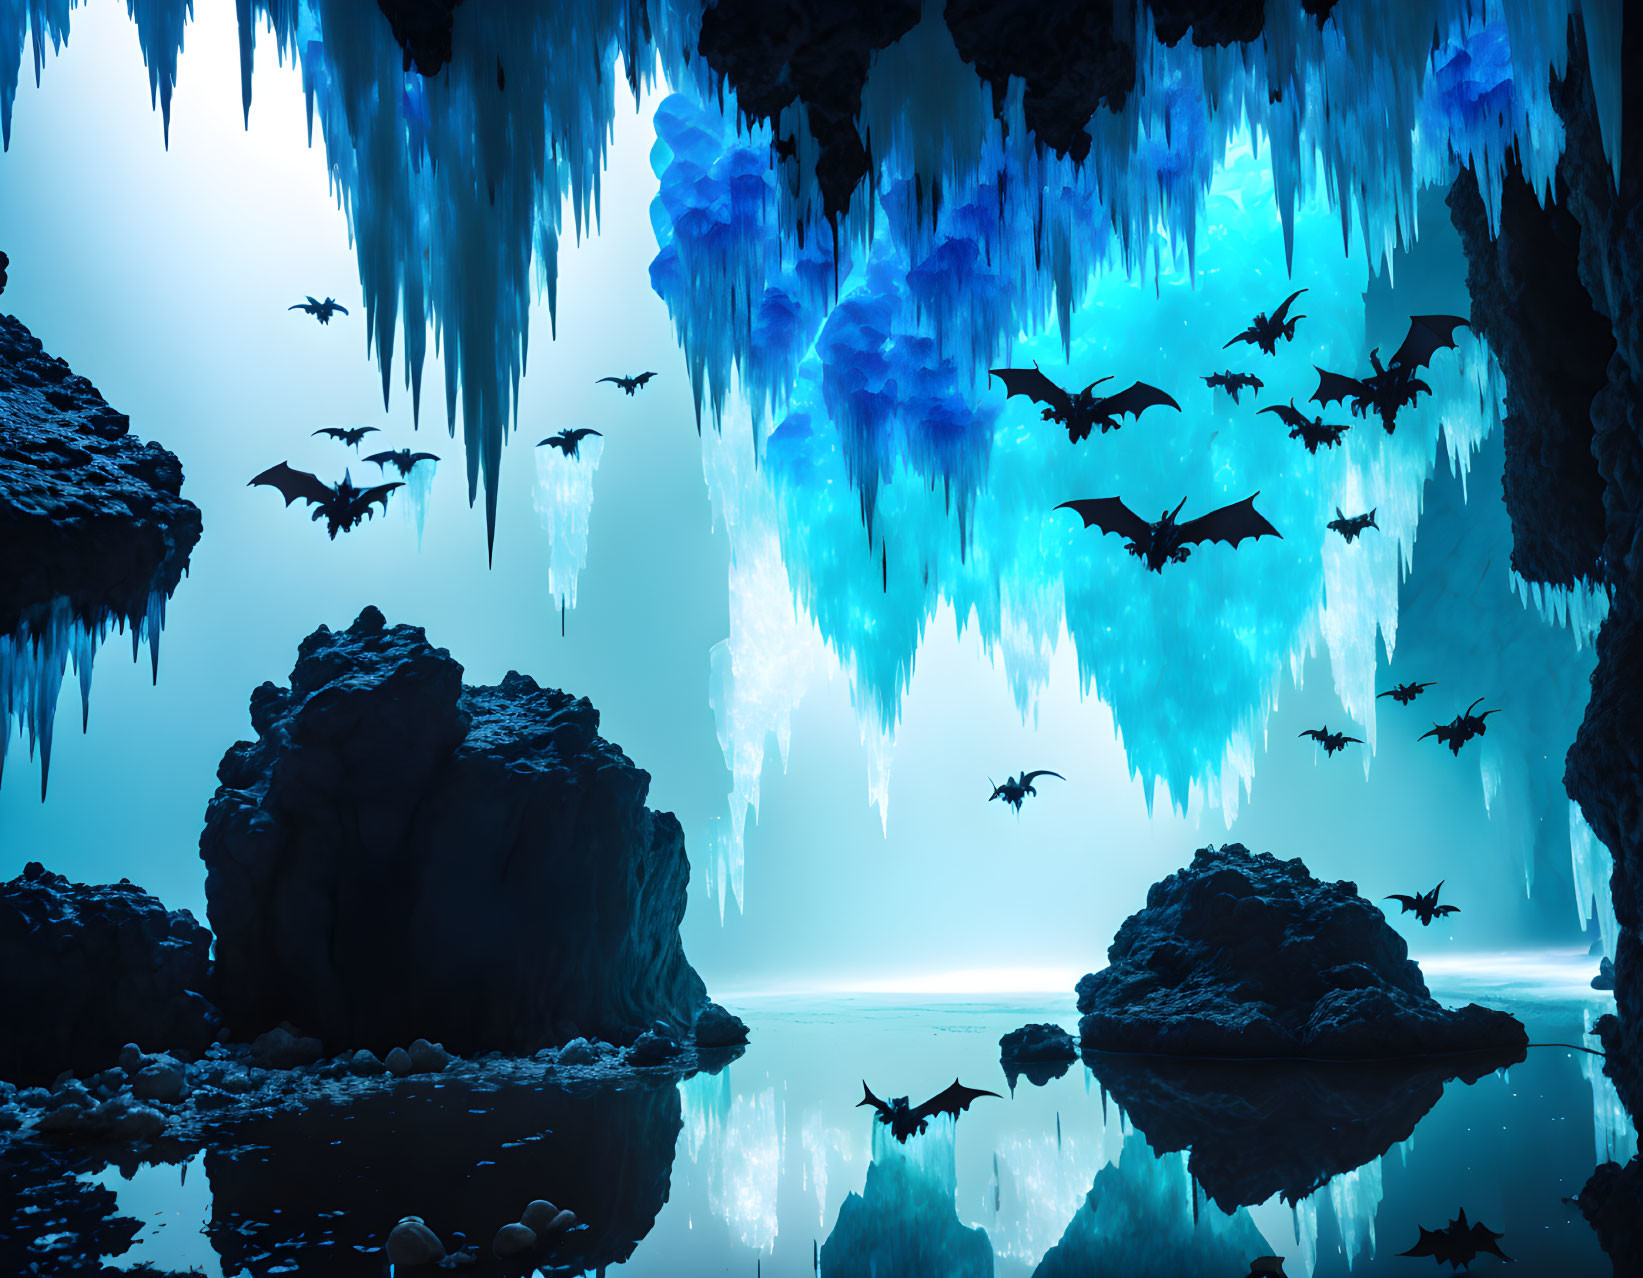 Ethereal cave with glowing blue icicles and flying bats